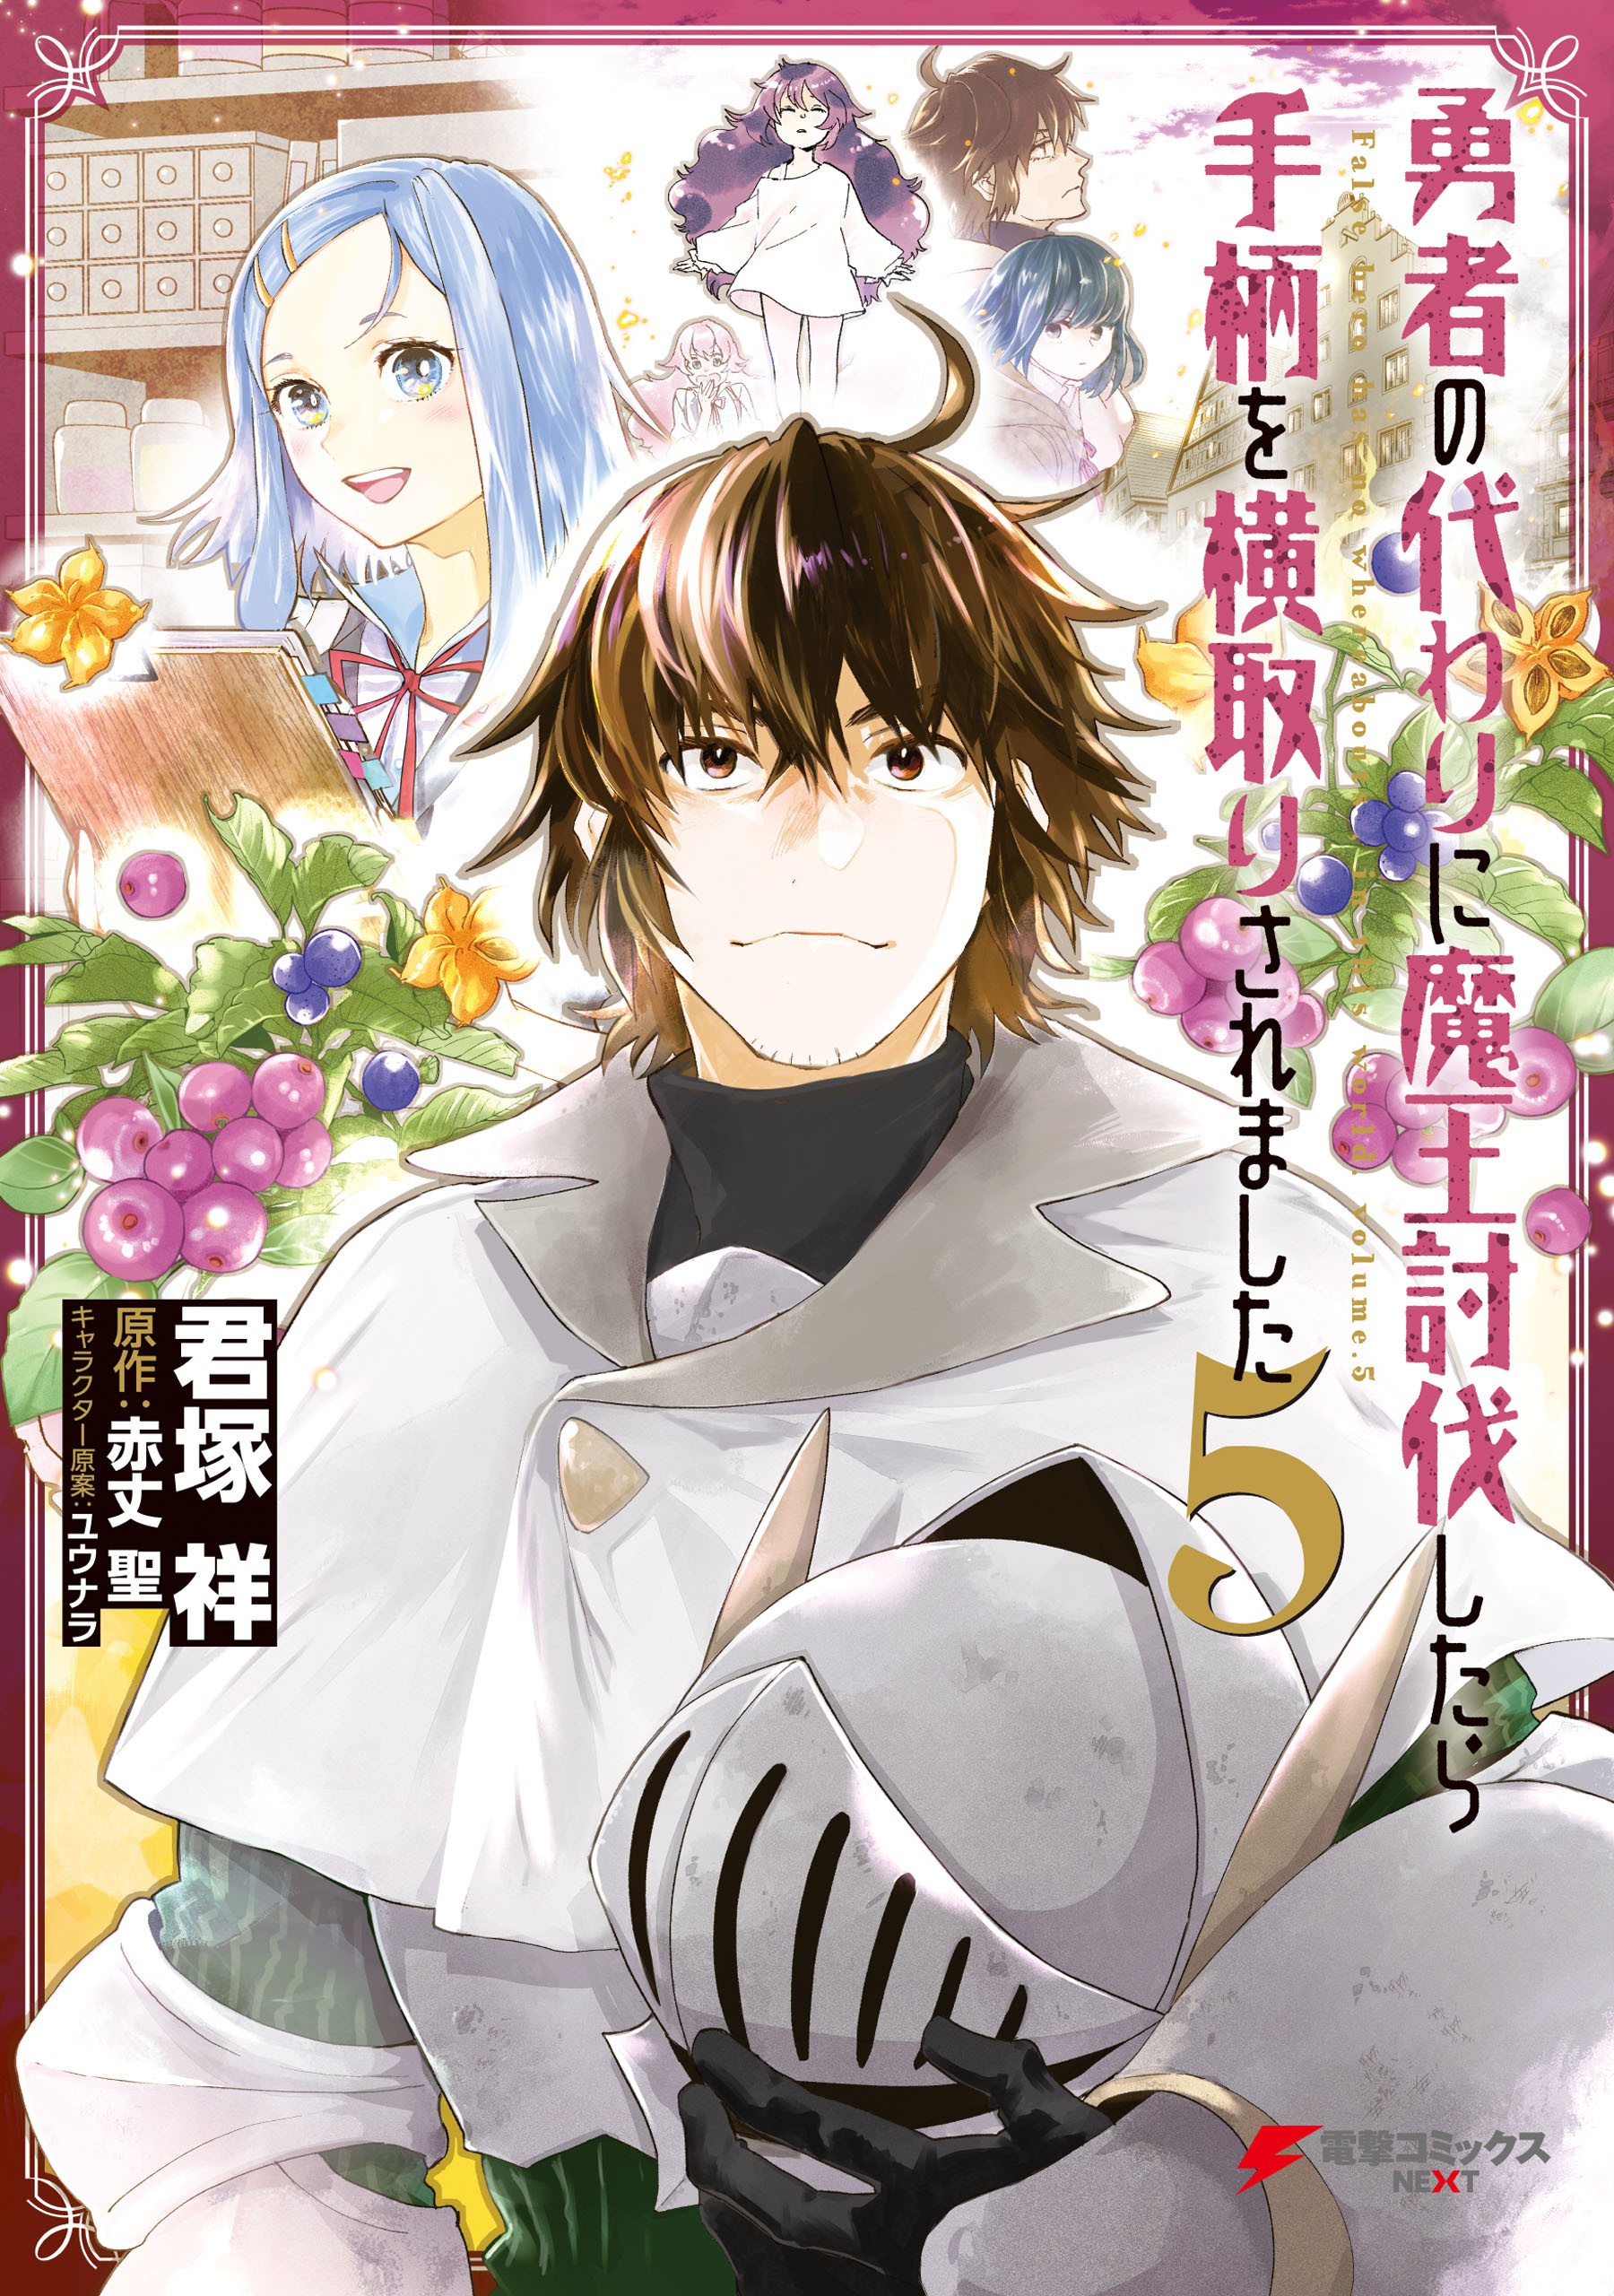 Manga Mogura RE on X: Light Novel In Another World With My Smartphone  Vol.28 by Fuyuhara Patora, Usatsuka Eiji 2nd Season of anime airing in  April, 3.  / X